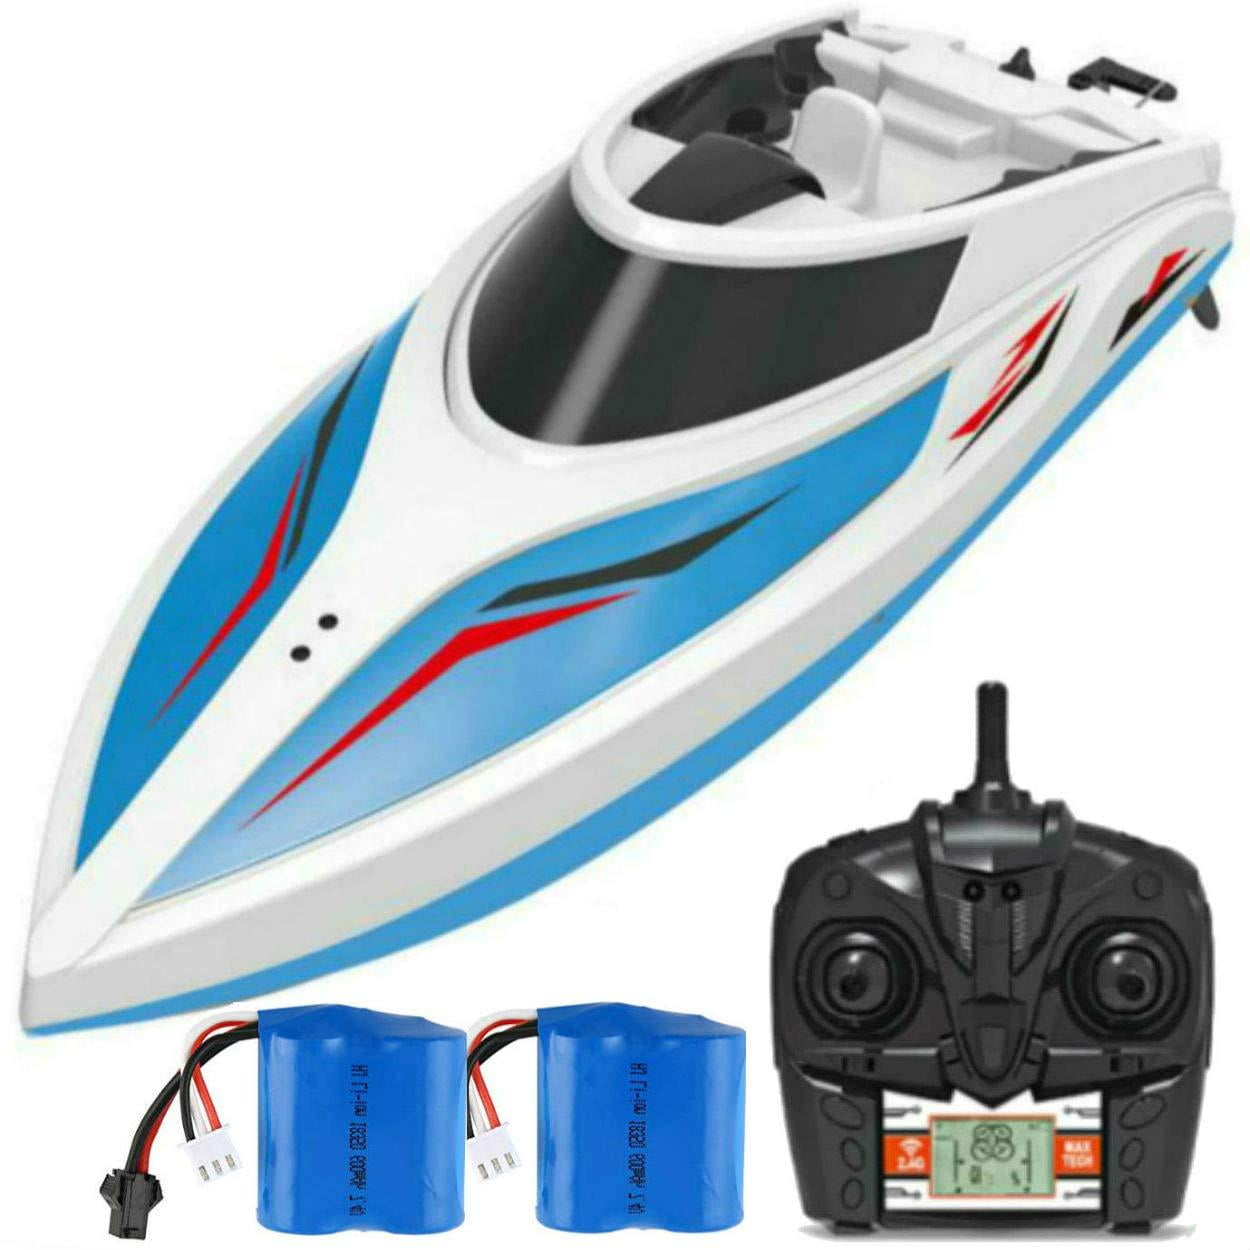 Self Righting High Speed Boat Toys for Boys or Girls Remote Control Boats for Pools and Lakes H102 Remote Controlled RC Boats for Kids or Adults